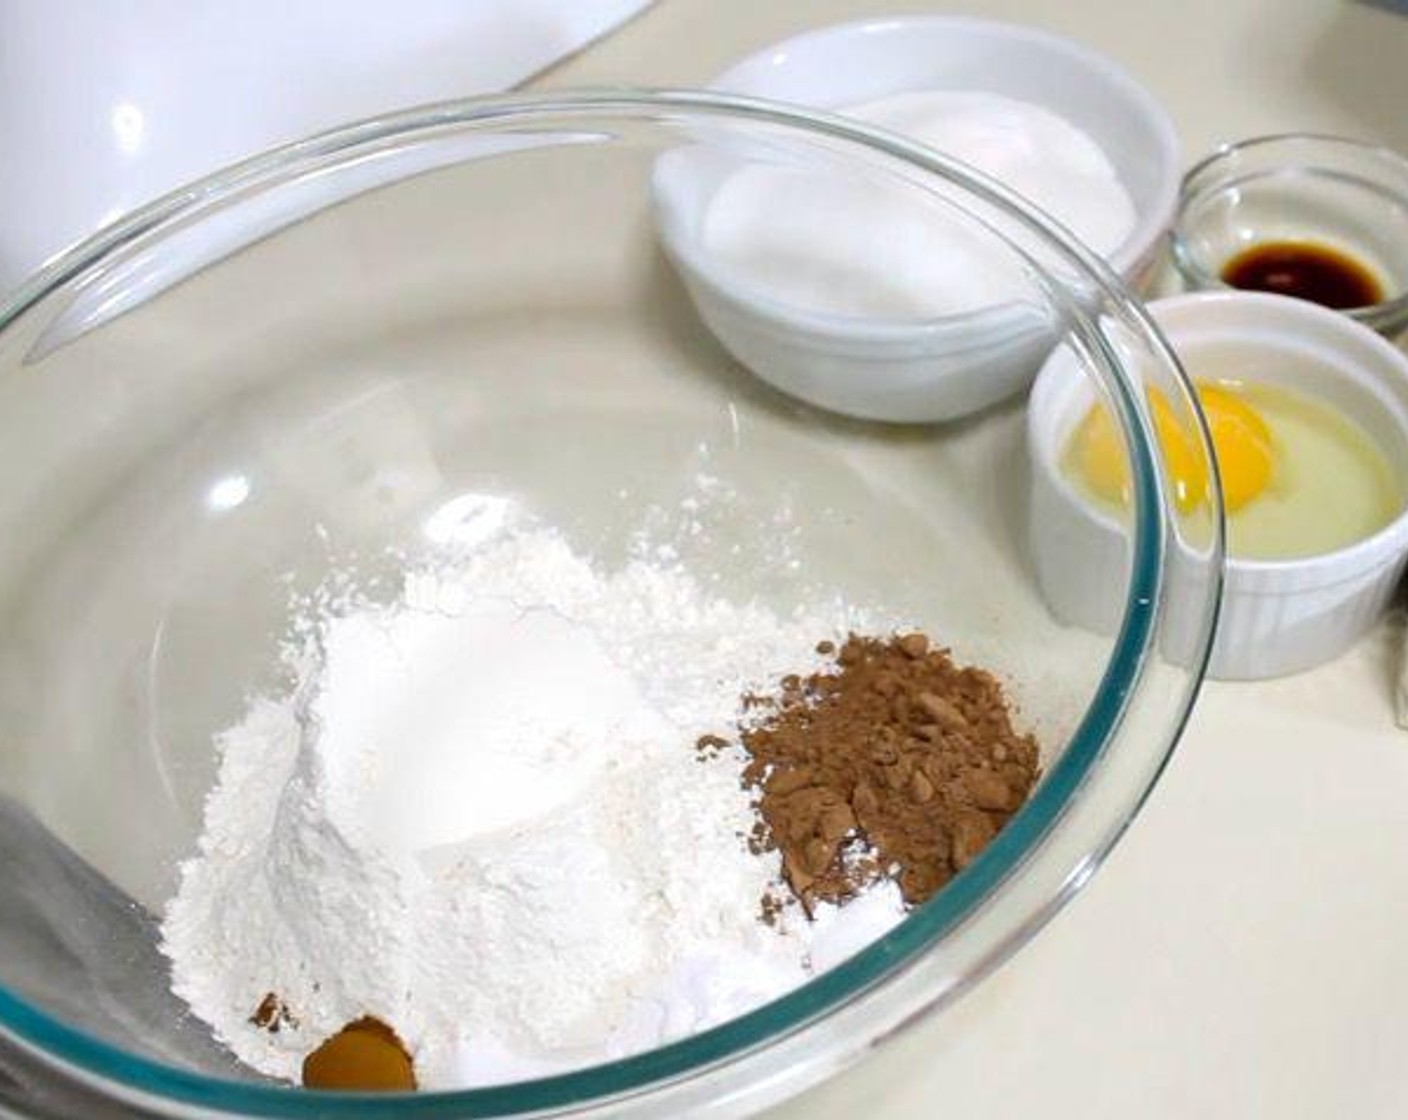 step 2 In a mixing bowl, add All-Purpose Flour (1 1/2 cups), Unsweetened Cocoa Powder (3 Tbsp), Baking Soda (1 tsp), Baking Powder (1/4 tsp), Ground Cinnamon (1/8 tsp), and Salt (1/4 tsp). Stir to combine.